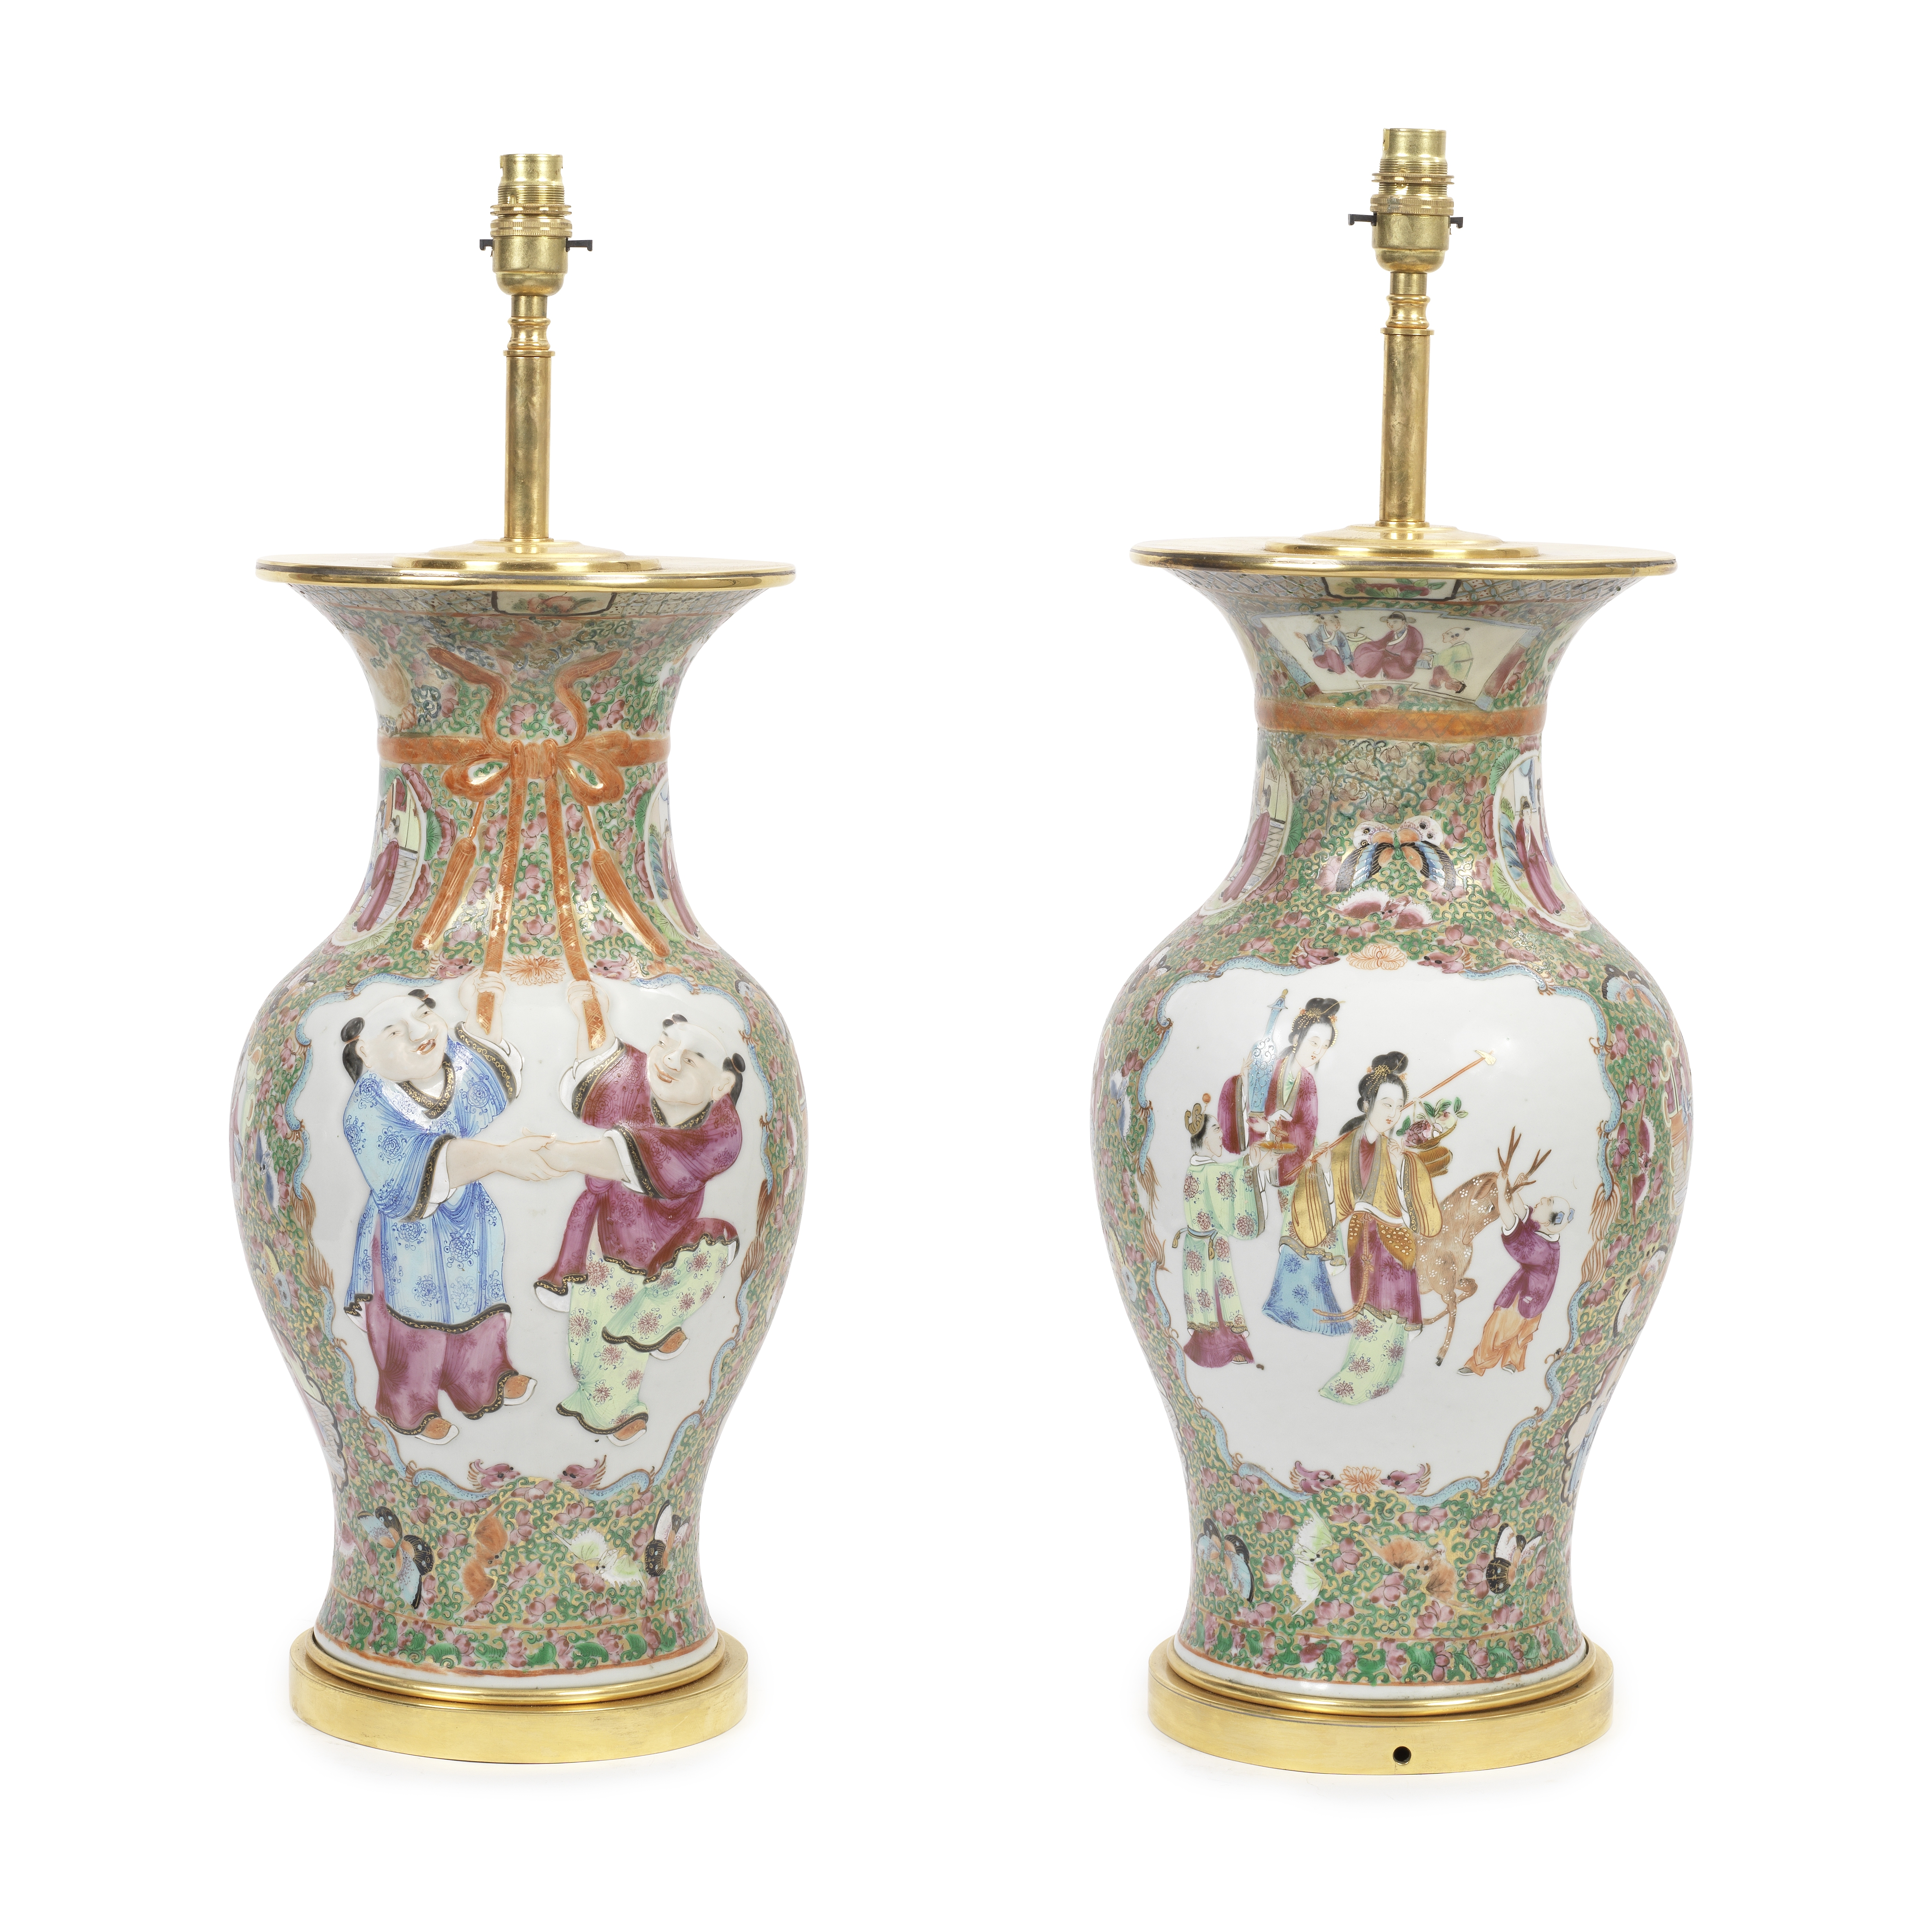 A pair of unusual late 19th century Chinese famille rose porcelain vases later adapted as lampba...